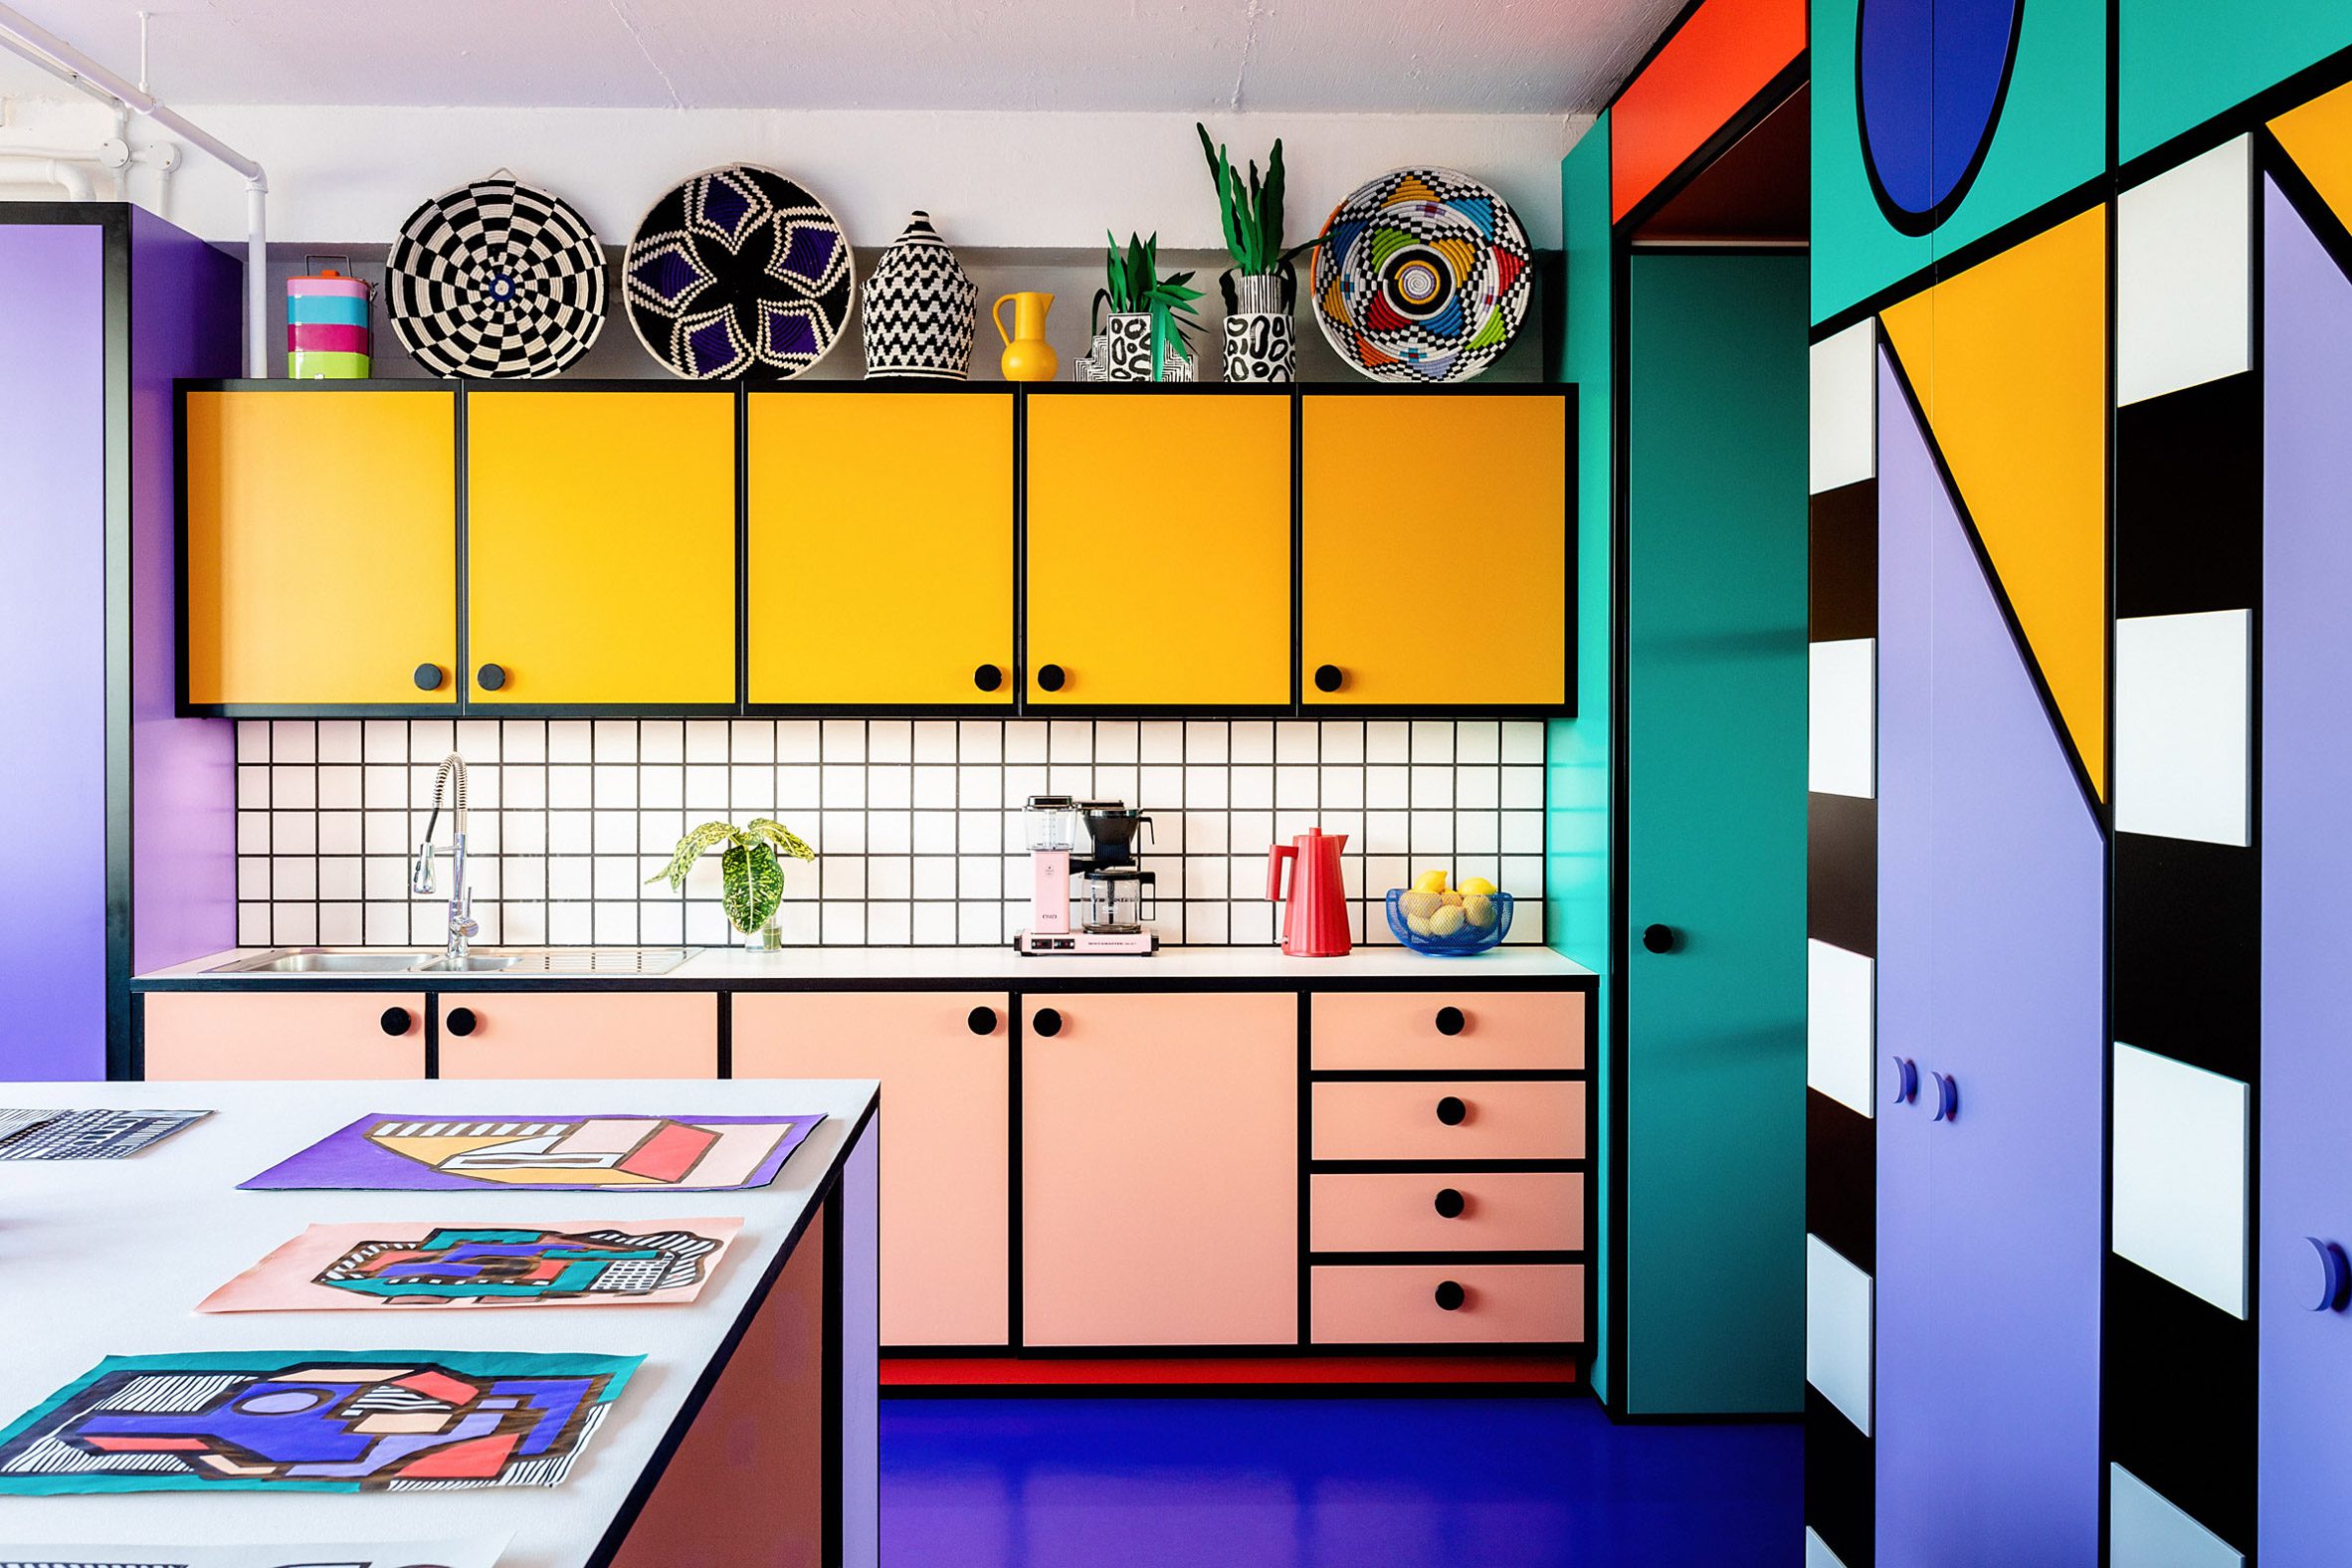 Photo of a brightly coloured kitchenette in Camille Walala's London studio